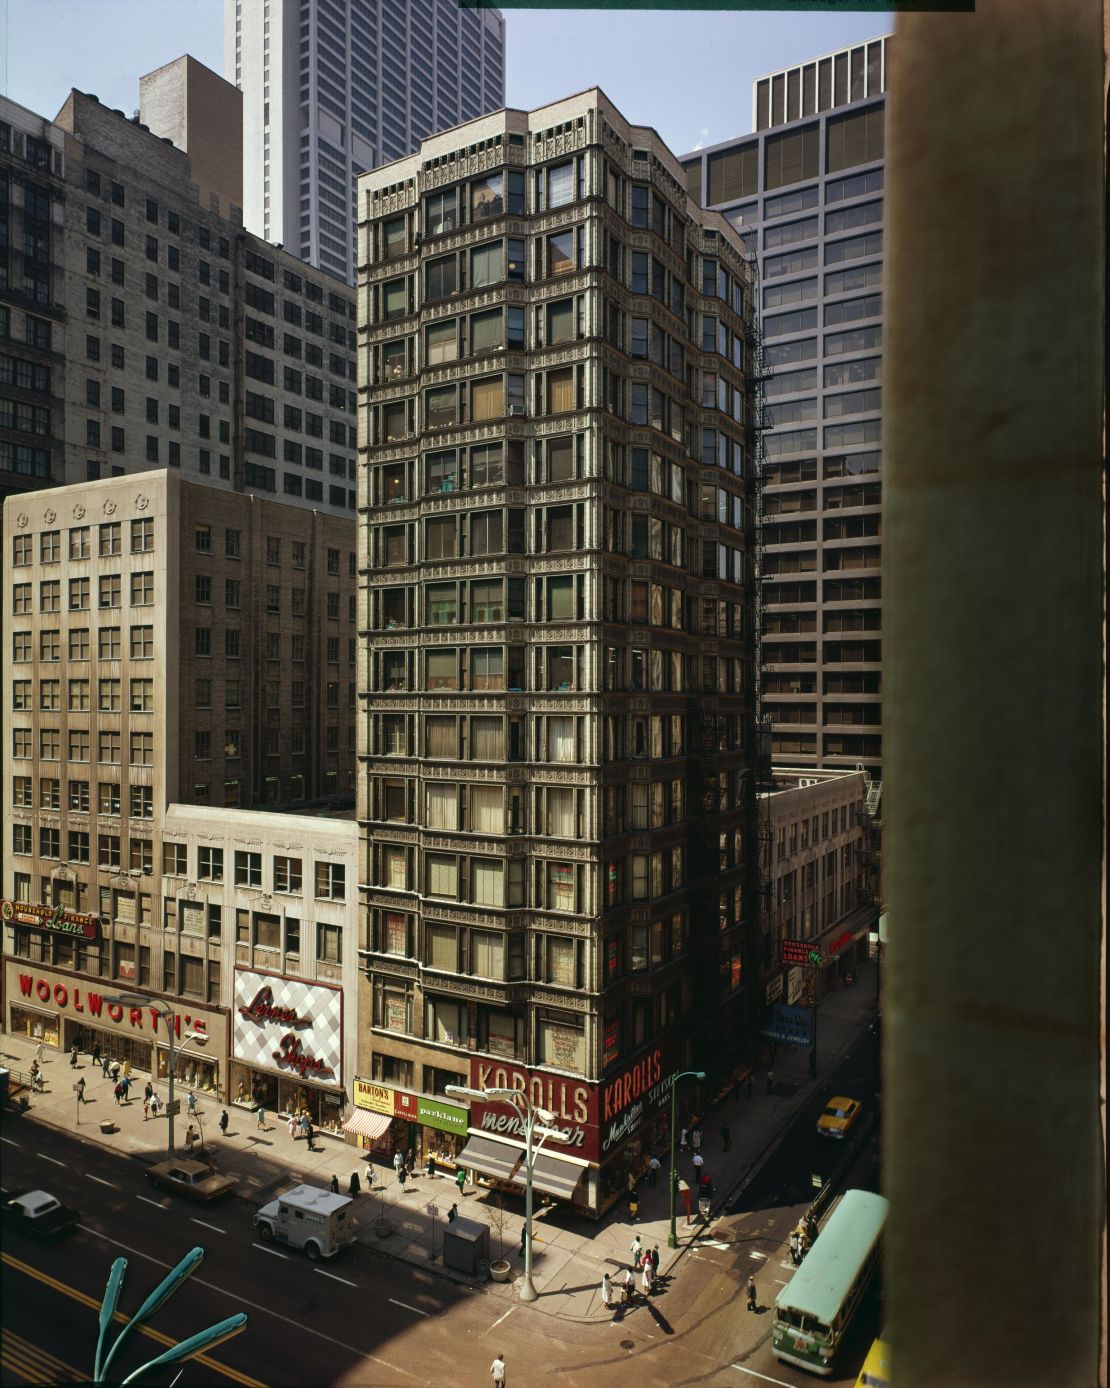 Reliance Building, Chicago